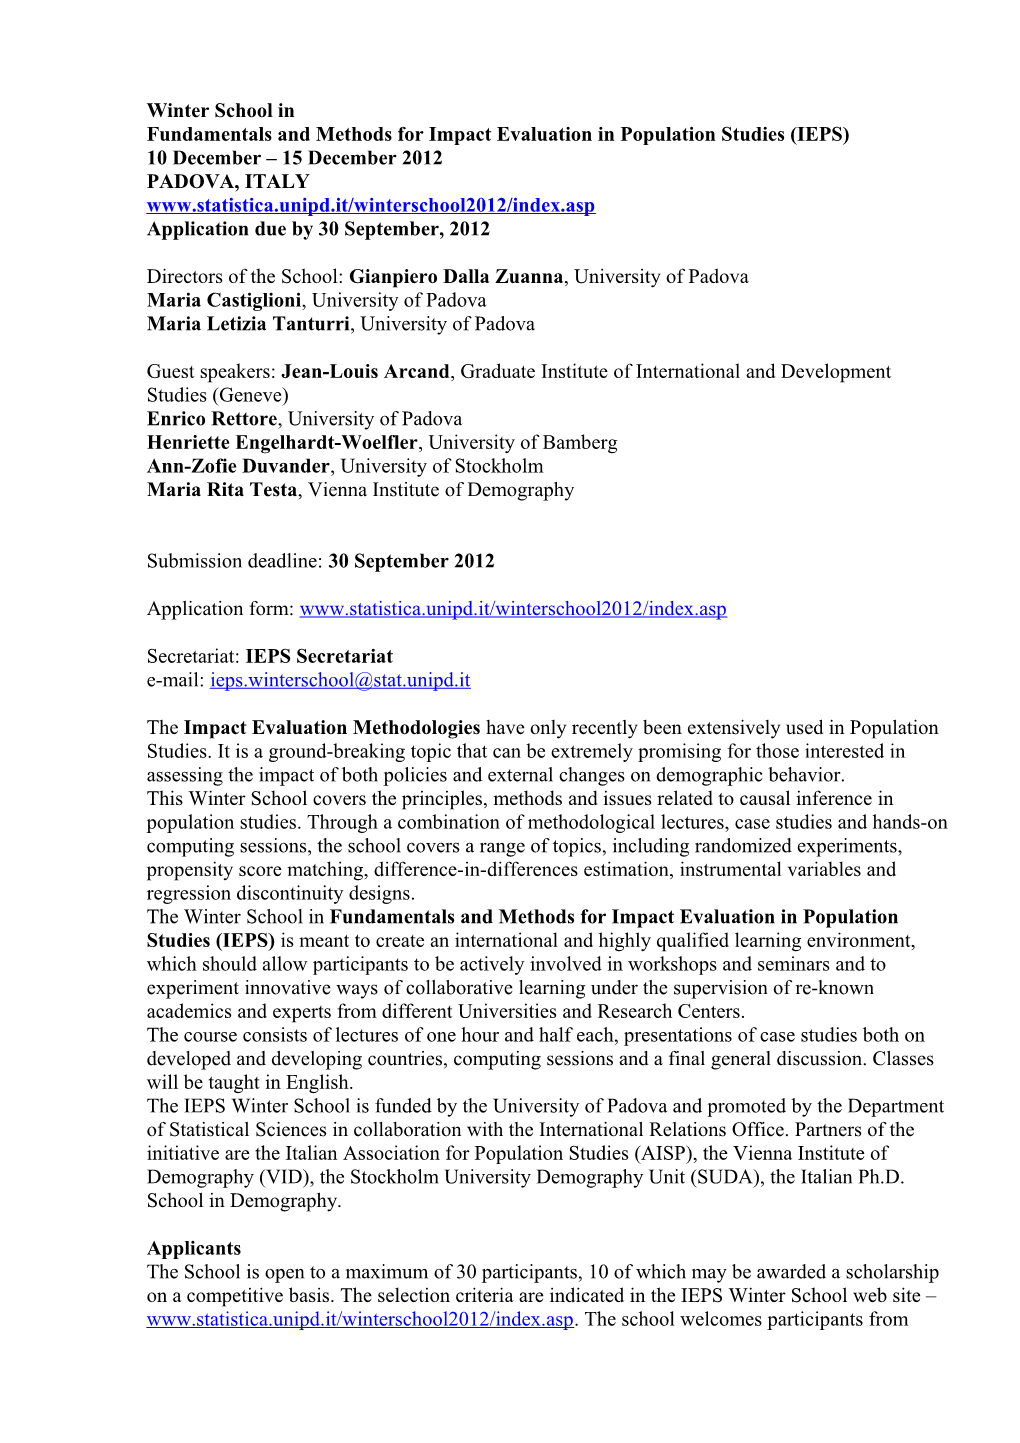 Call for Papers: 27Th International Population Conference